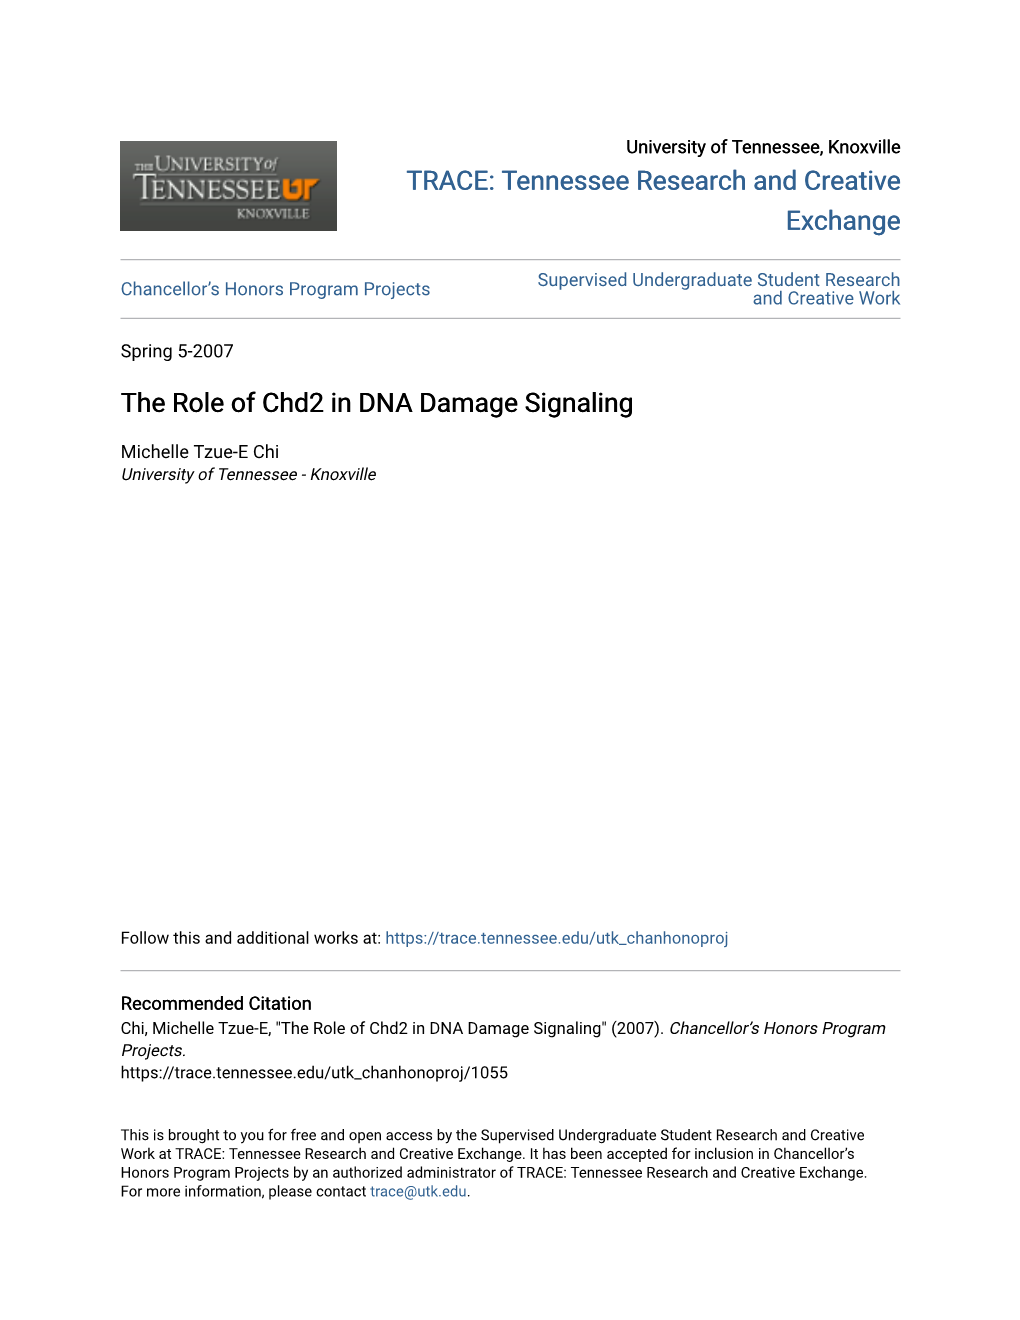 The Role of Chd2 in DNA Damage Signaling